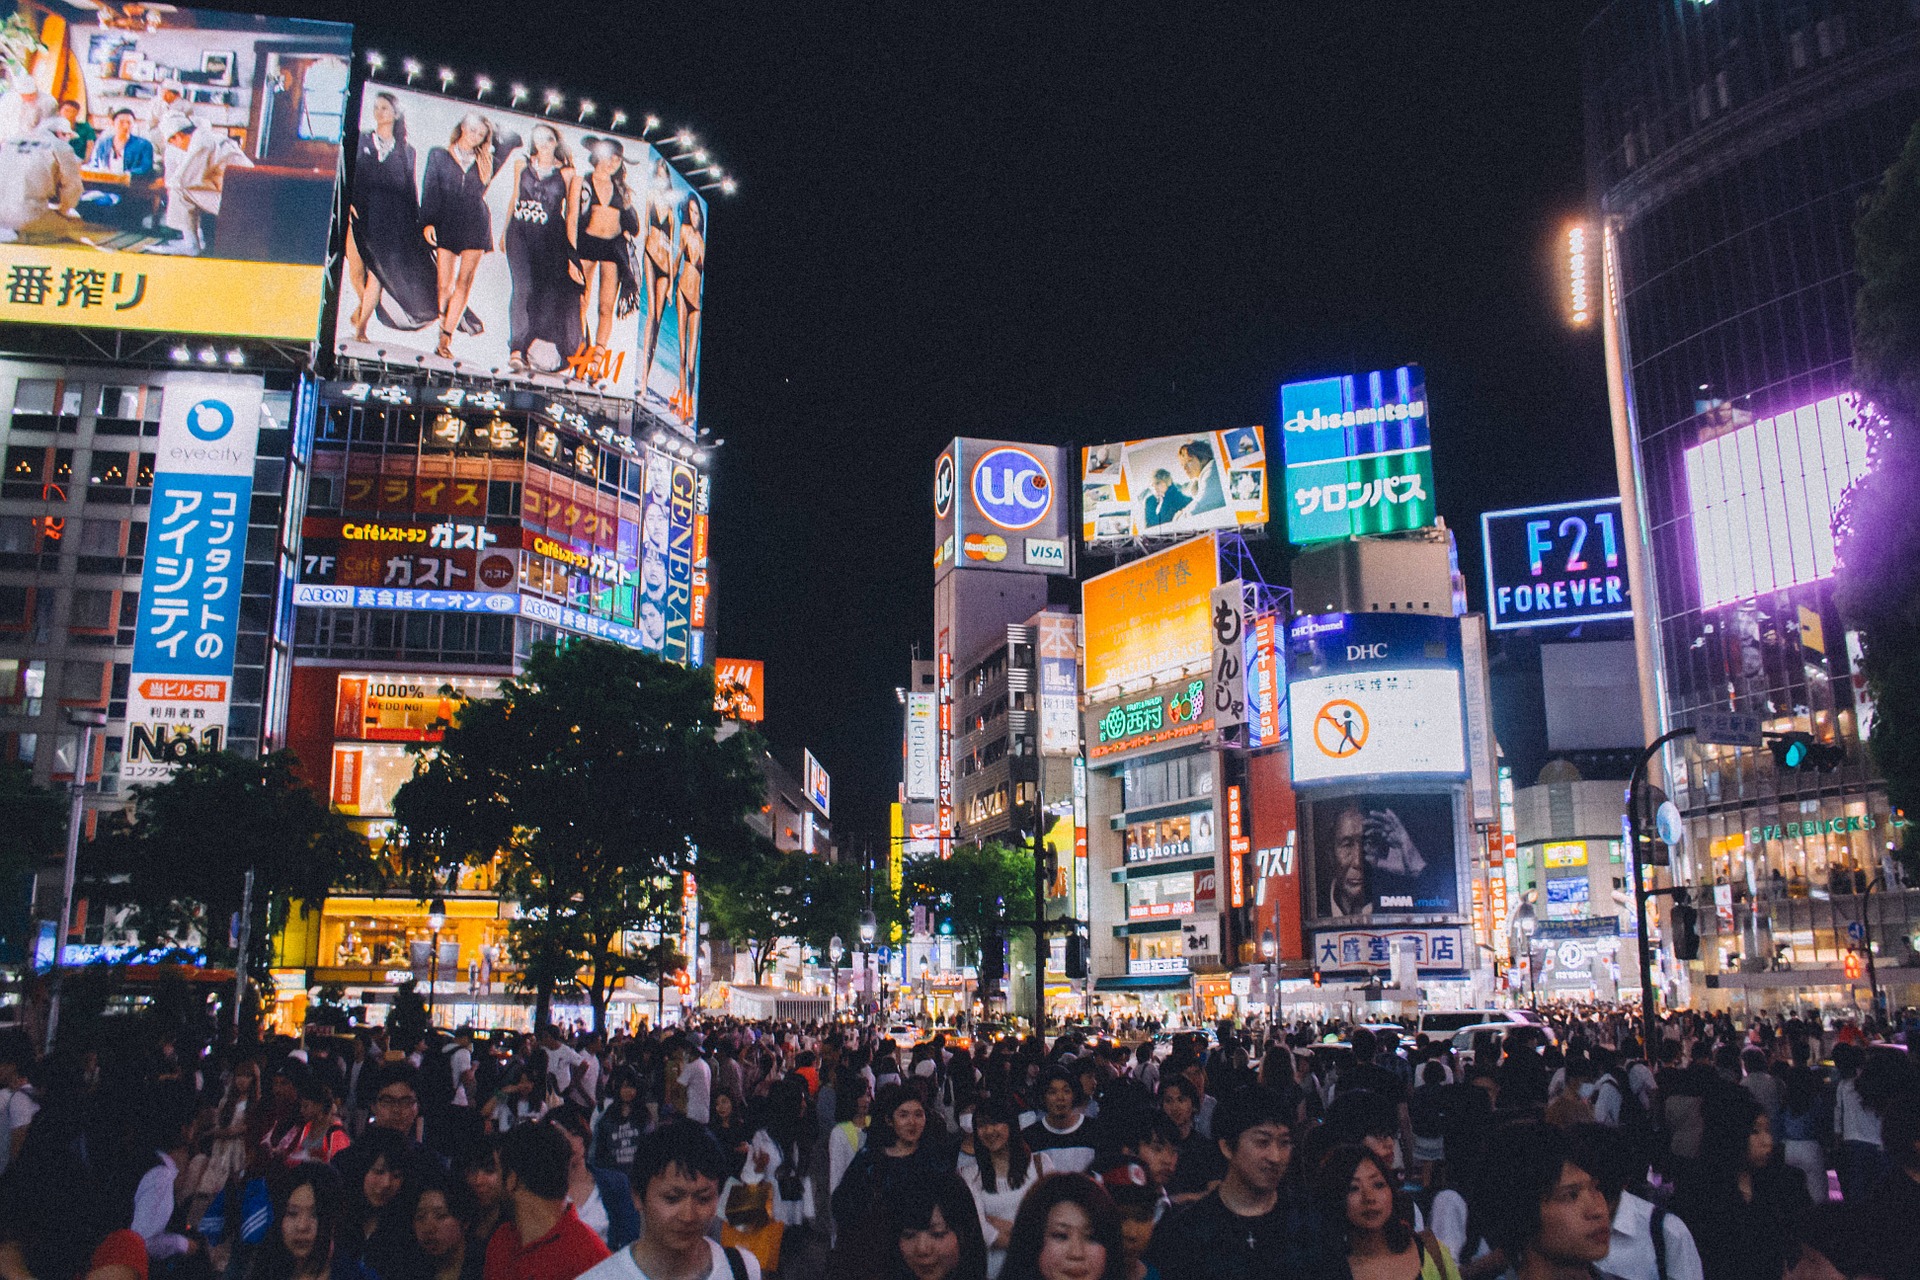 a photograph of Shibuya crossing, Tokyo, at night. The crossing is crowded with people. In the upper background are bright, digital billboards.